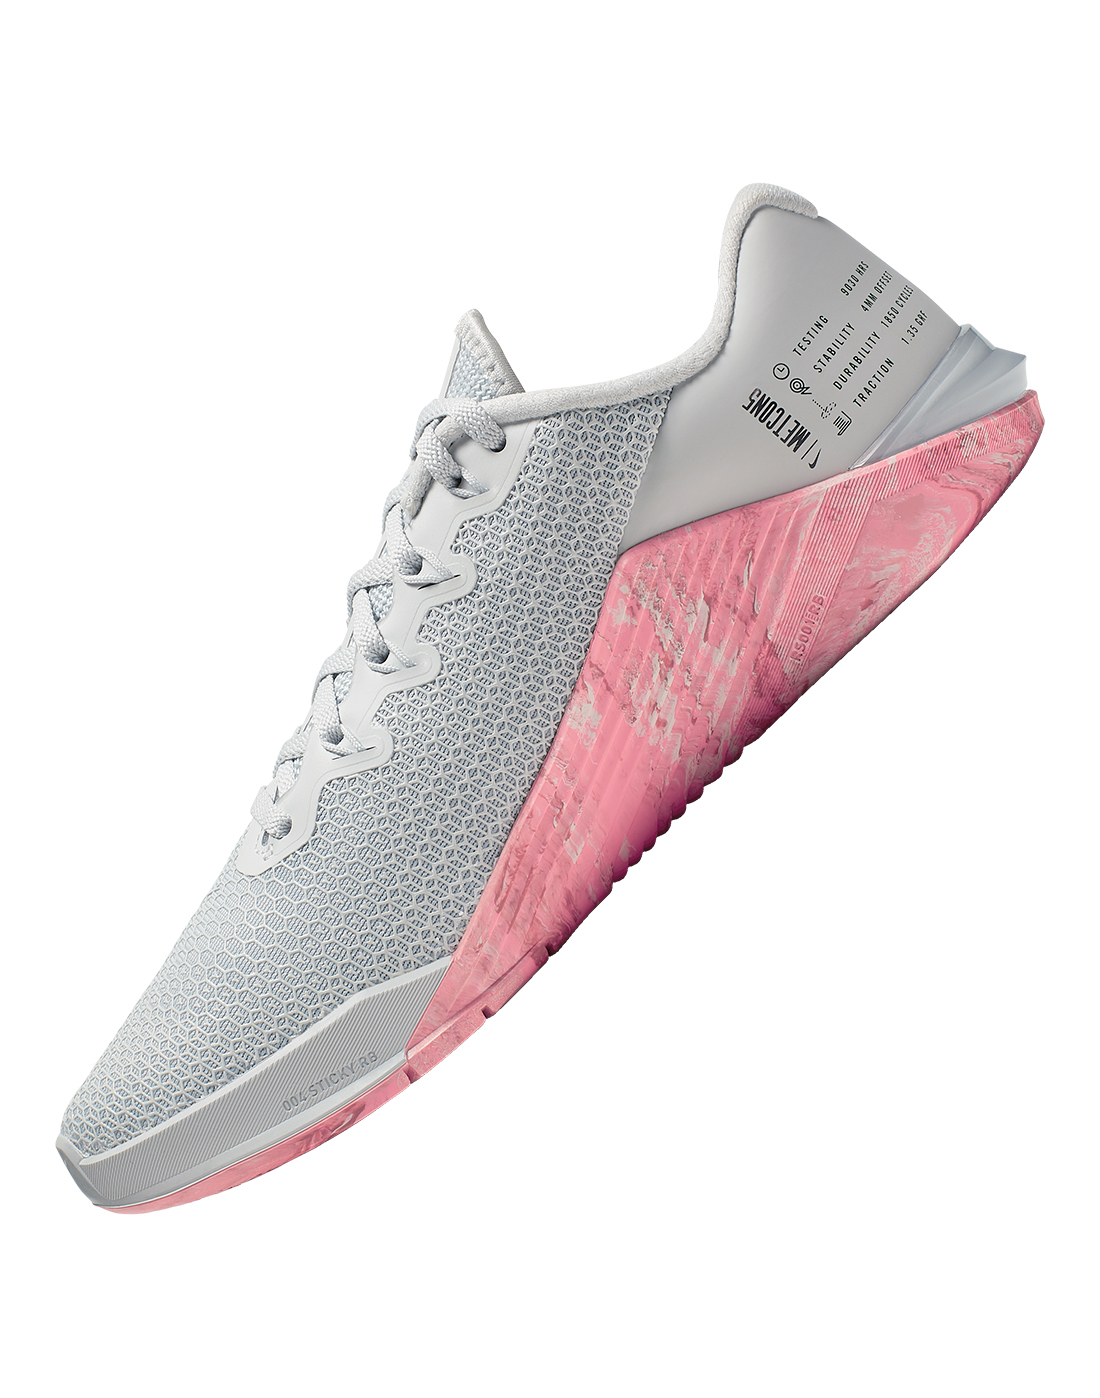 grey and pink metcon 5